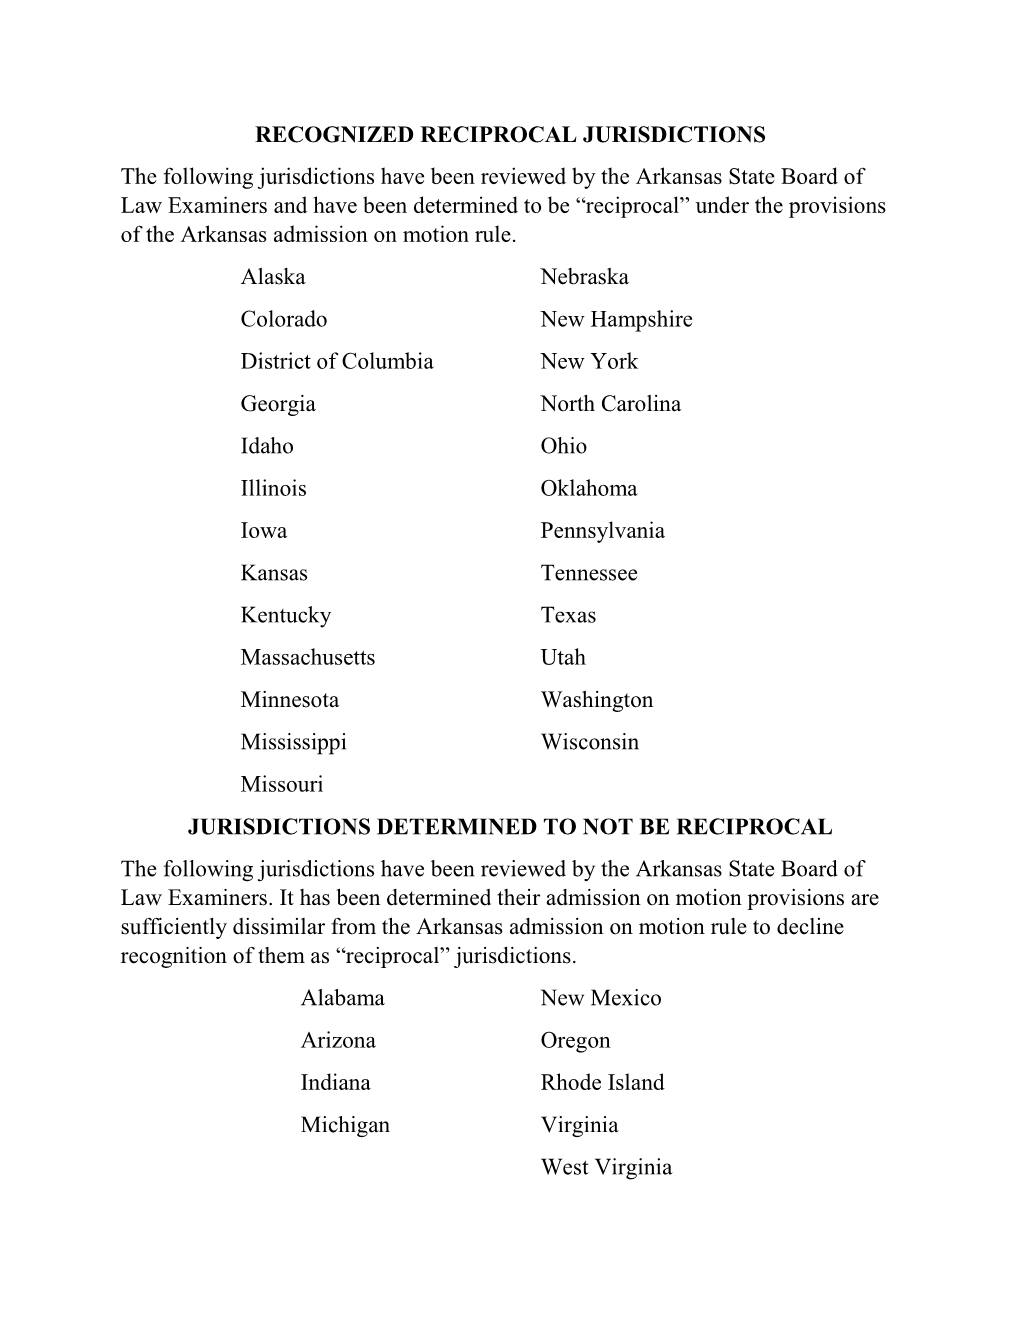 RECOGNIZED RECIPROCAL JURISDICTIONS the Following Jurisdictions Have Been Reviewed by the Arkansas State Board of Law Examiners